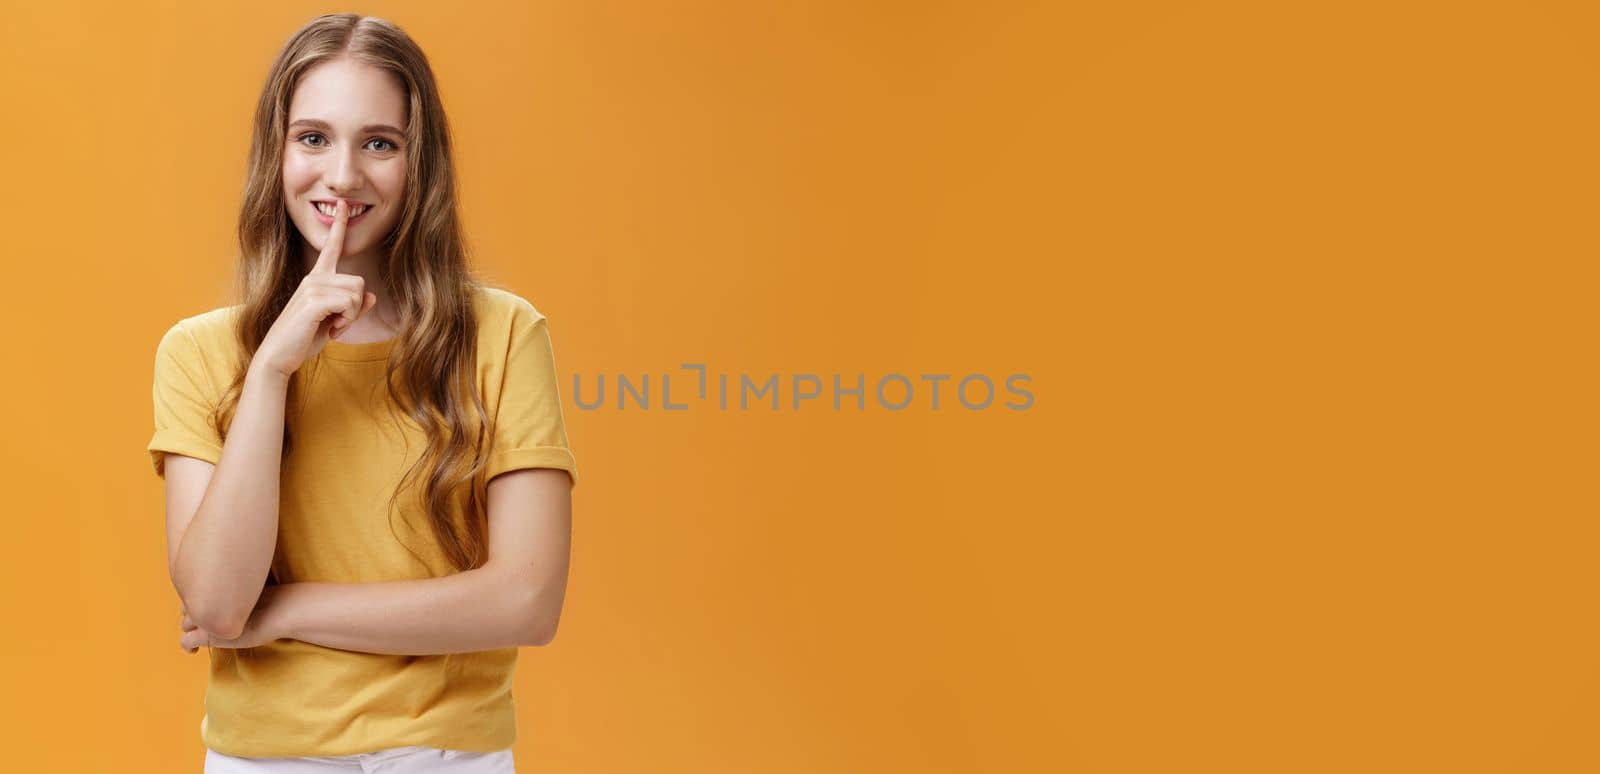 Girl wants keep secret betweet us. Portrait of charming good-looking slim pretty and young woman with long wavy hair and tattoo showing shh gesture with index finger over mouth against orange wall.